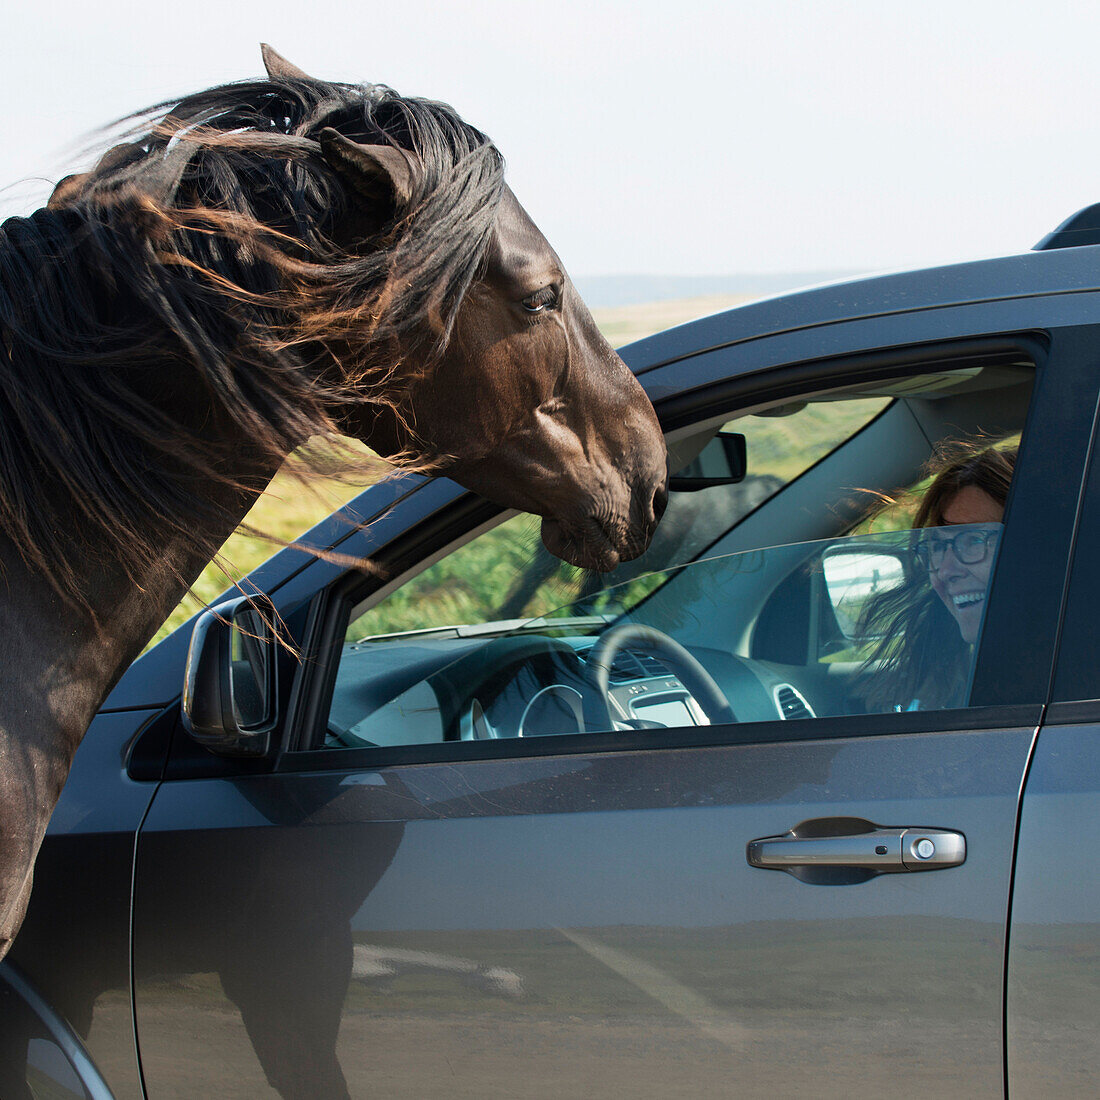 'A driver laughs as a horse stands at the open window of her car; Bonavista, Newfoundland and Labrador, Canada'